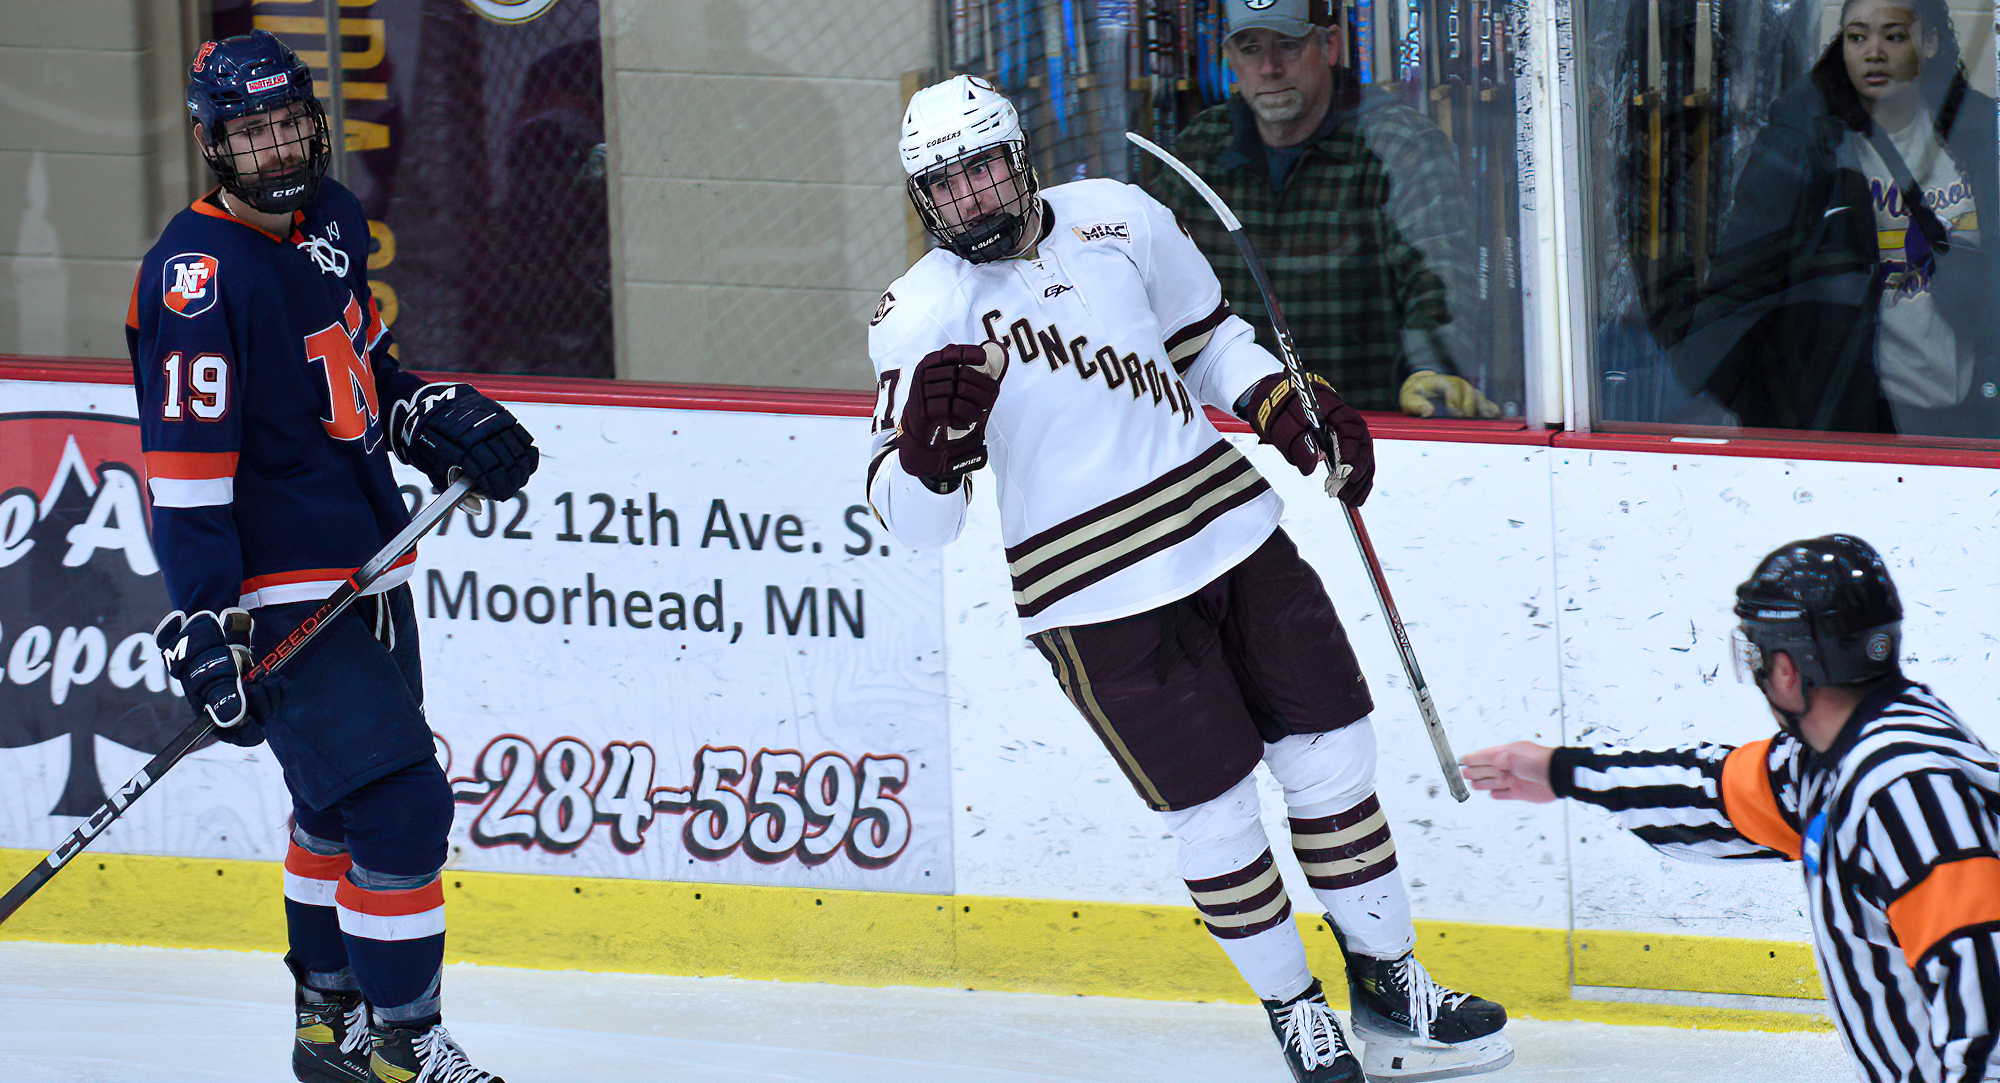 Junior Cole Lehman is all smiles after scoring his second-period goal in the Cobbers' 6-2 win over Northland.